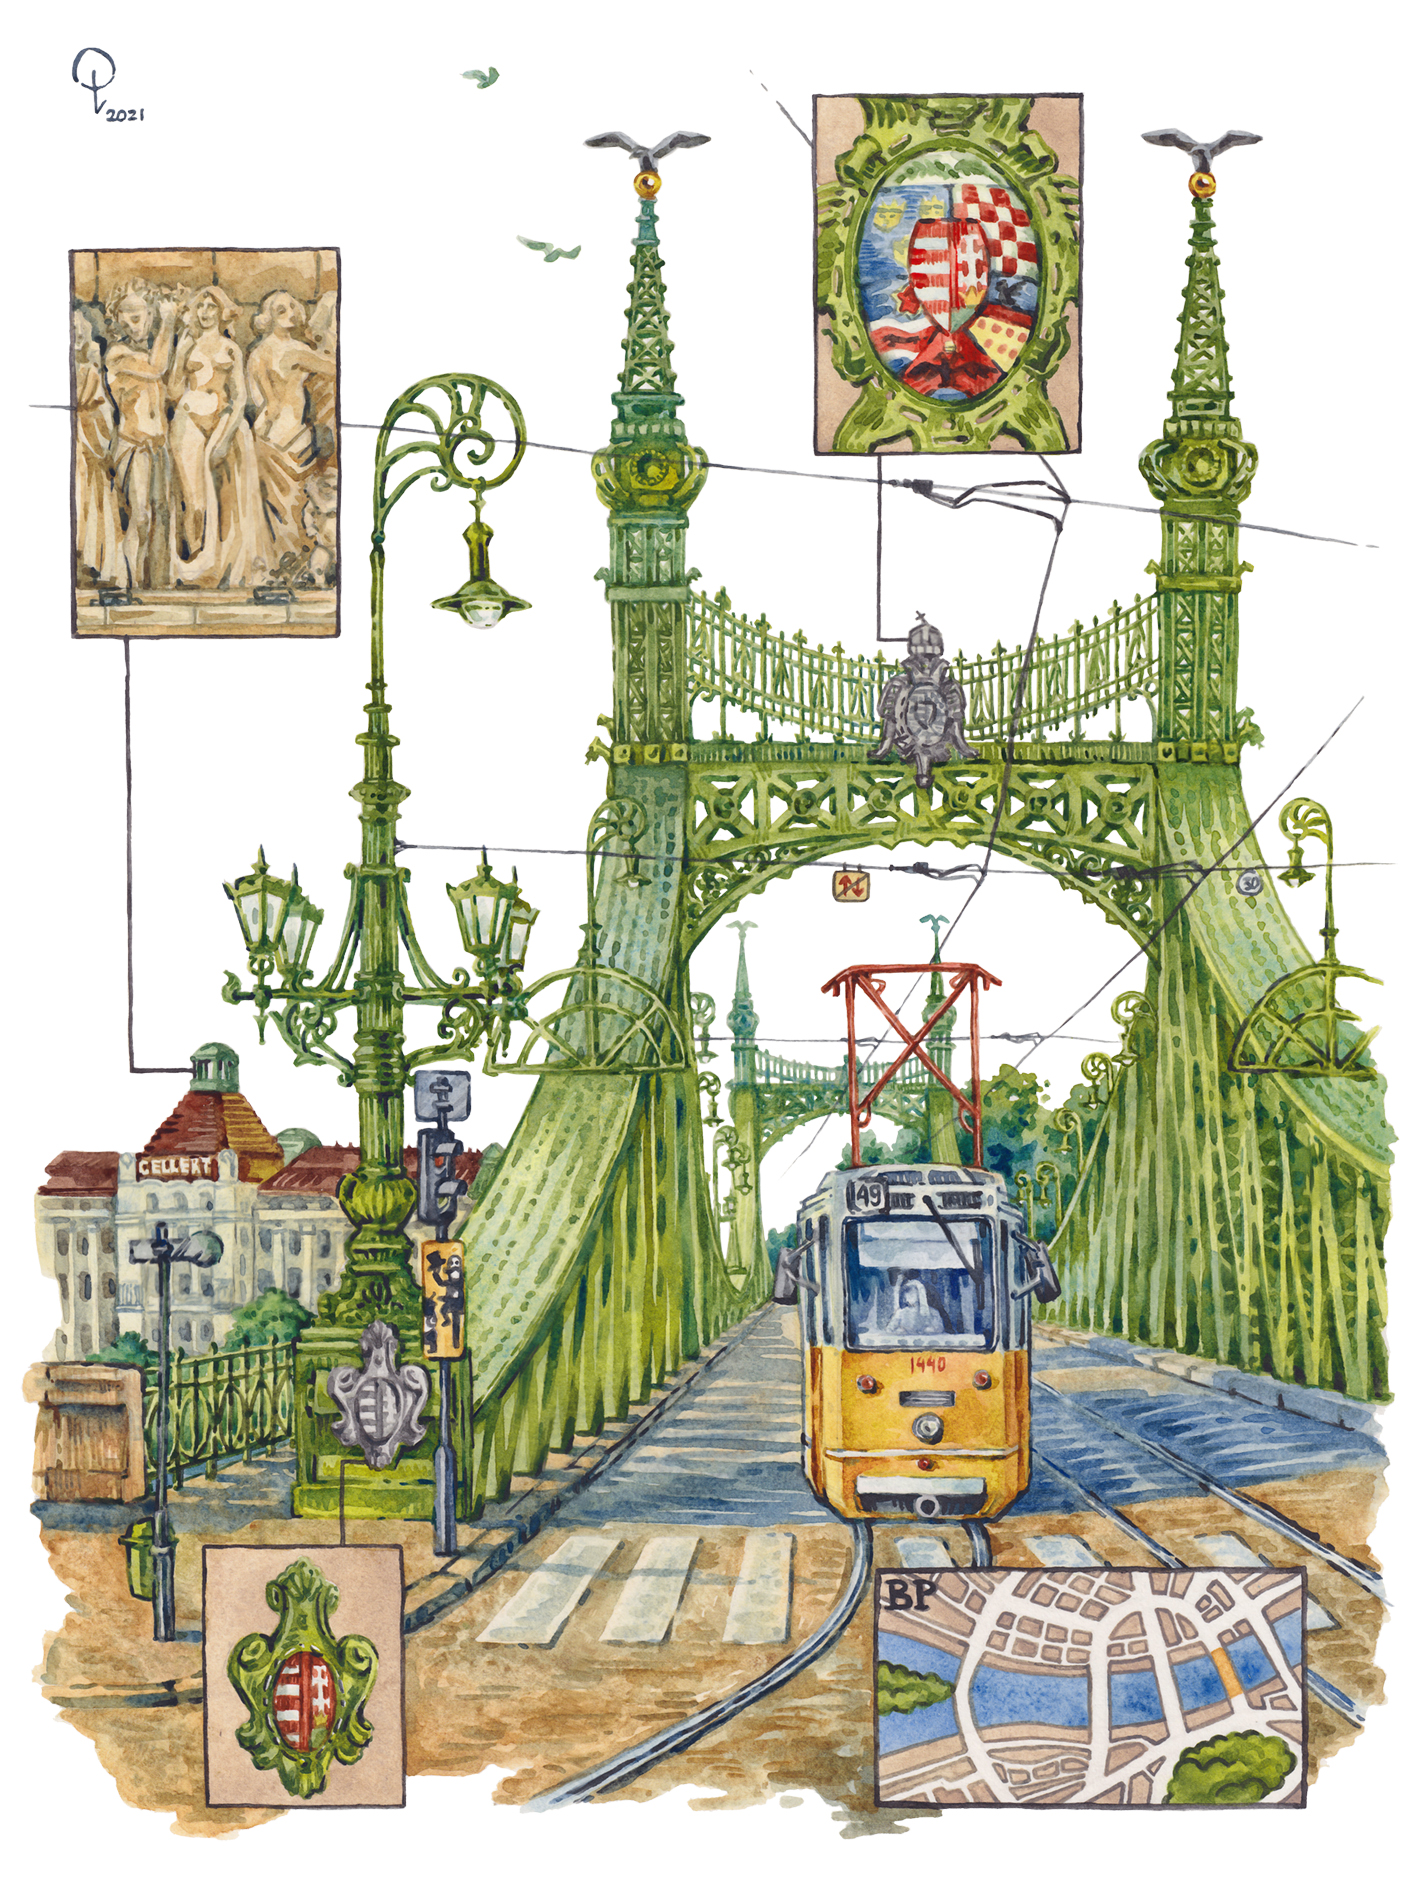 Watercolor (watercolour) painting of Liberty bridge in Budapest.